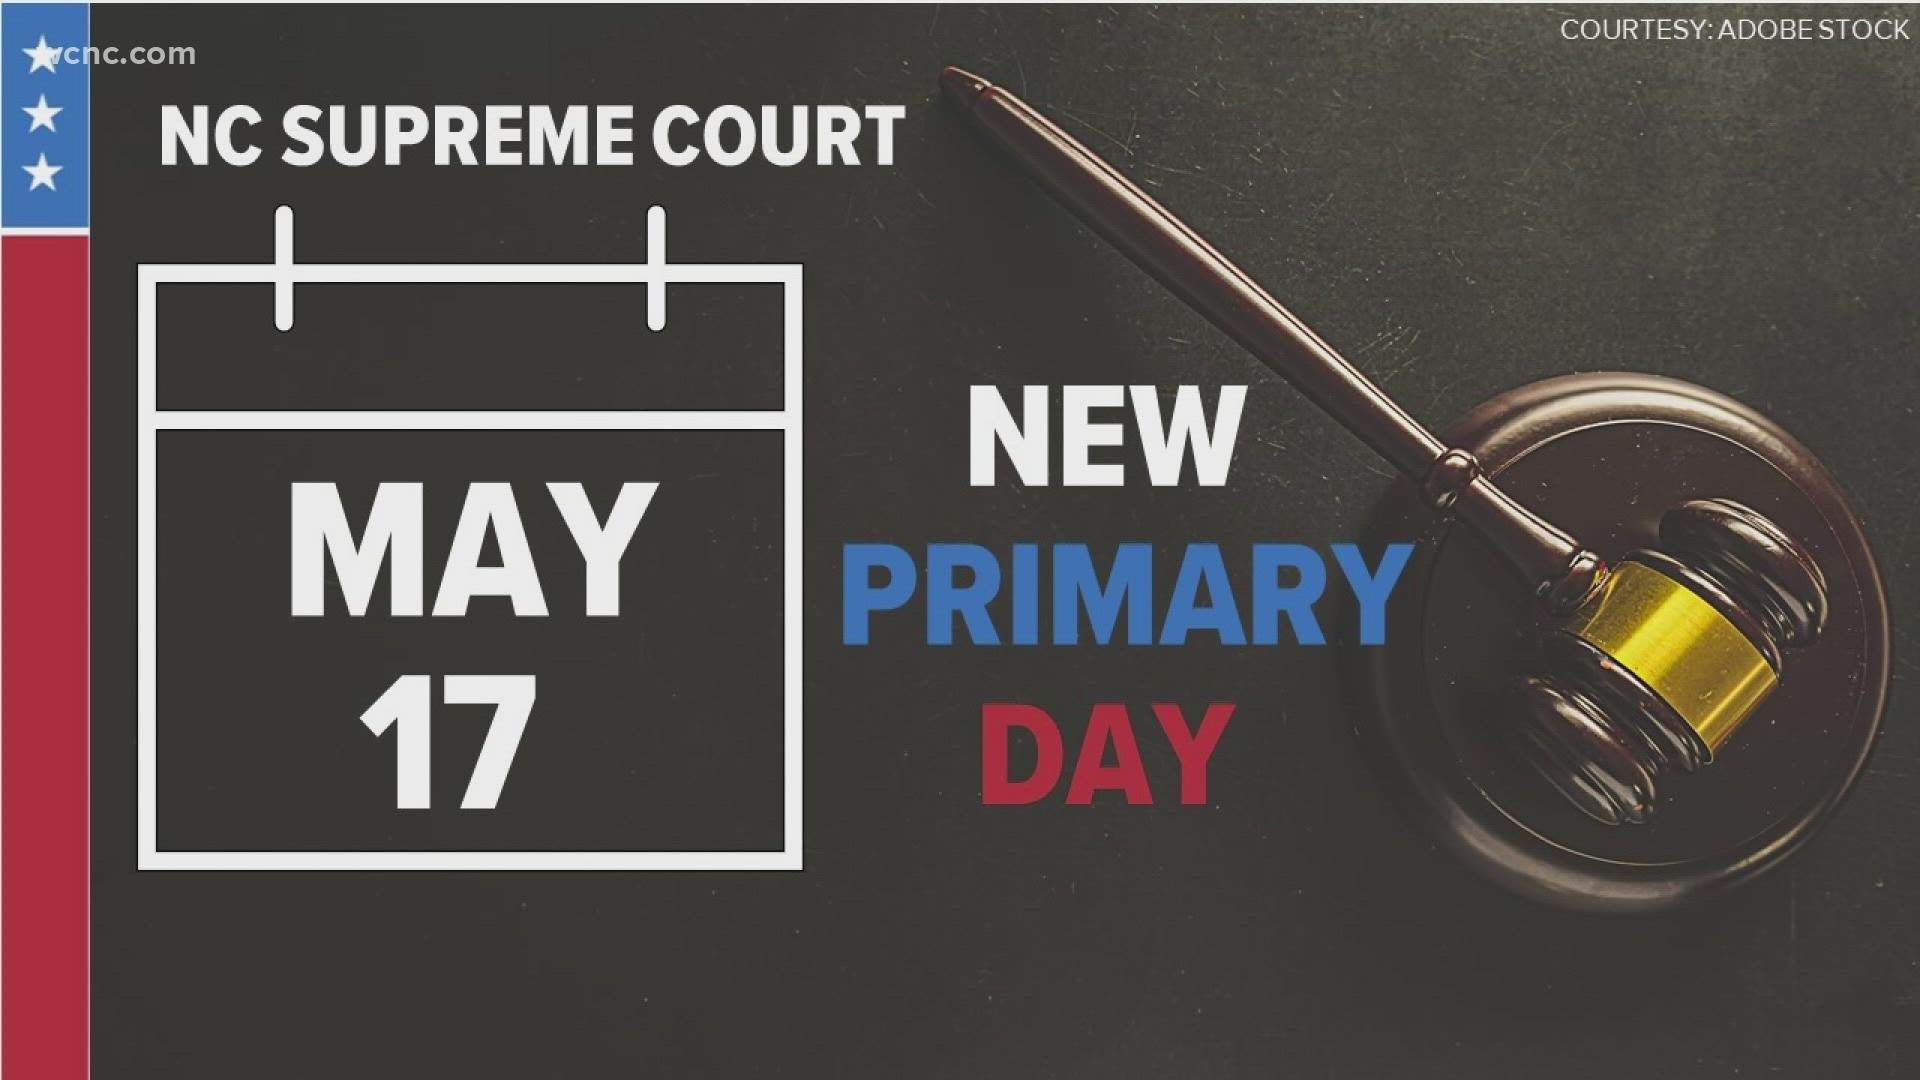 The NC Supreme Court issued an order on Tuesday pushing back election primaries over two months. It comes amid challenges to new electoral maps within the state.